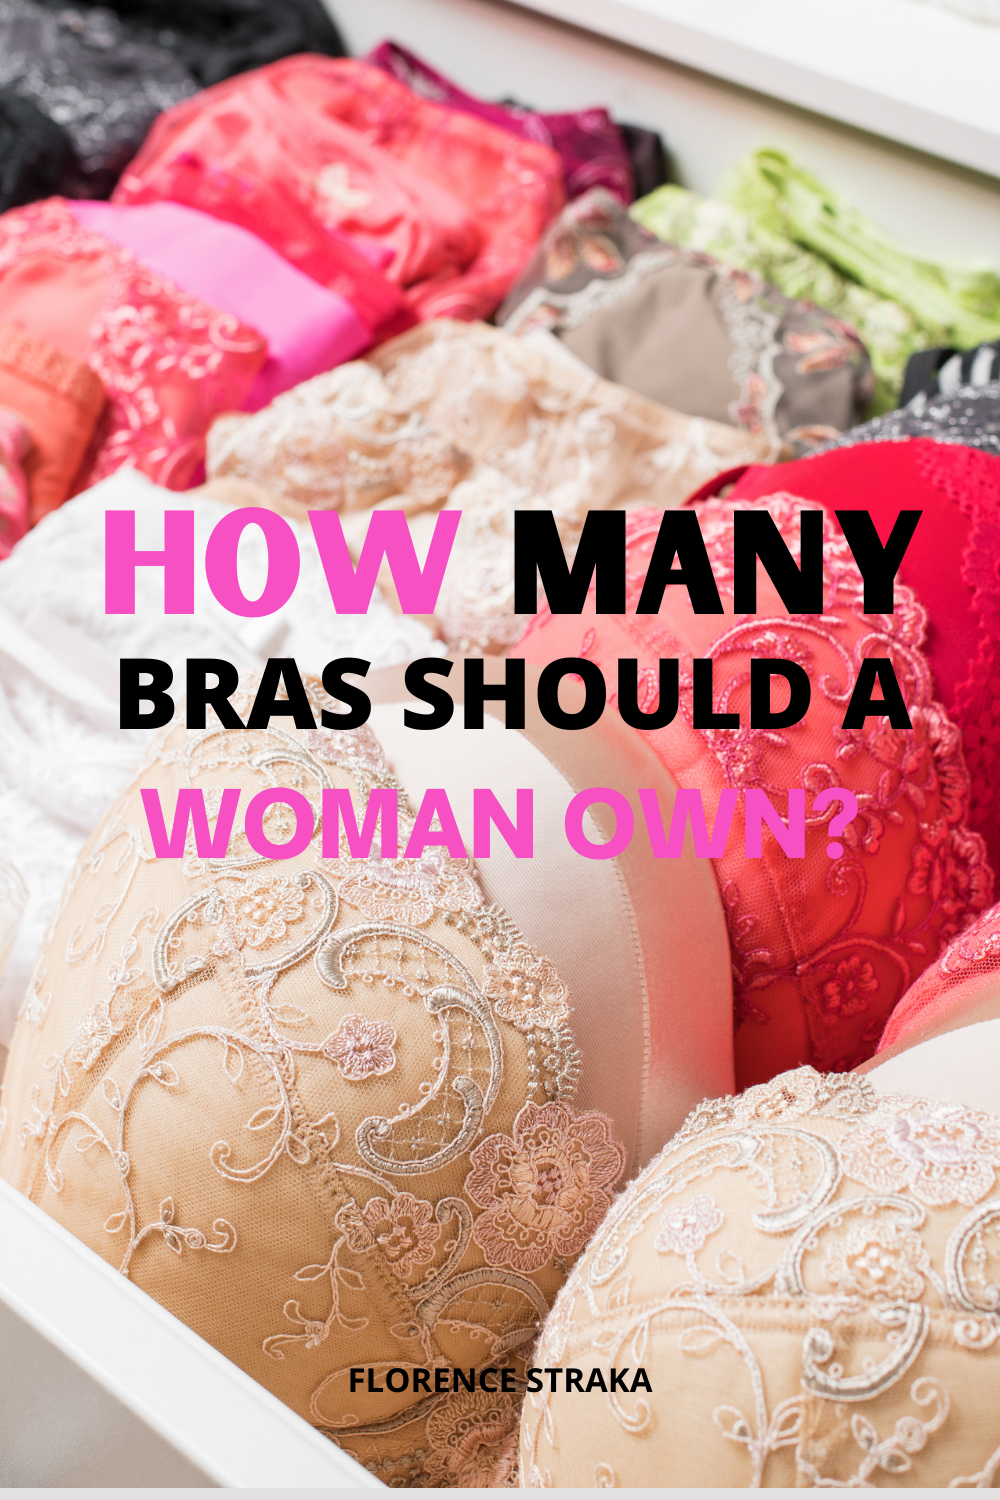 How many bras should a woman owns